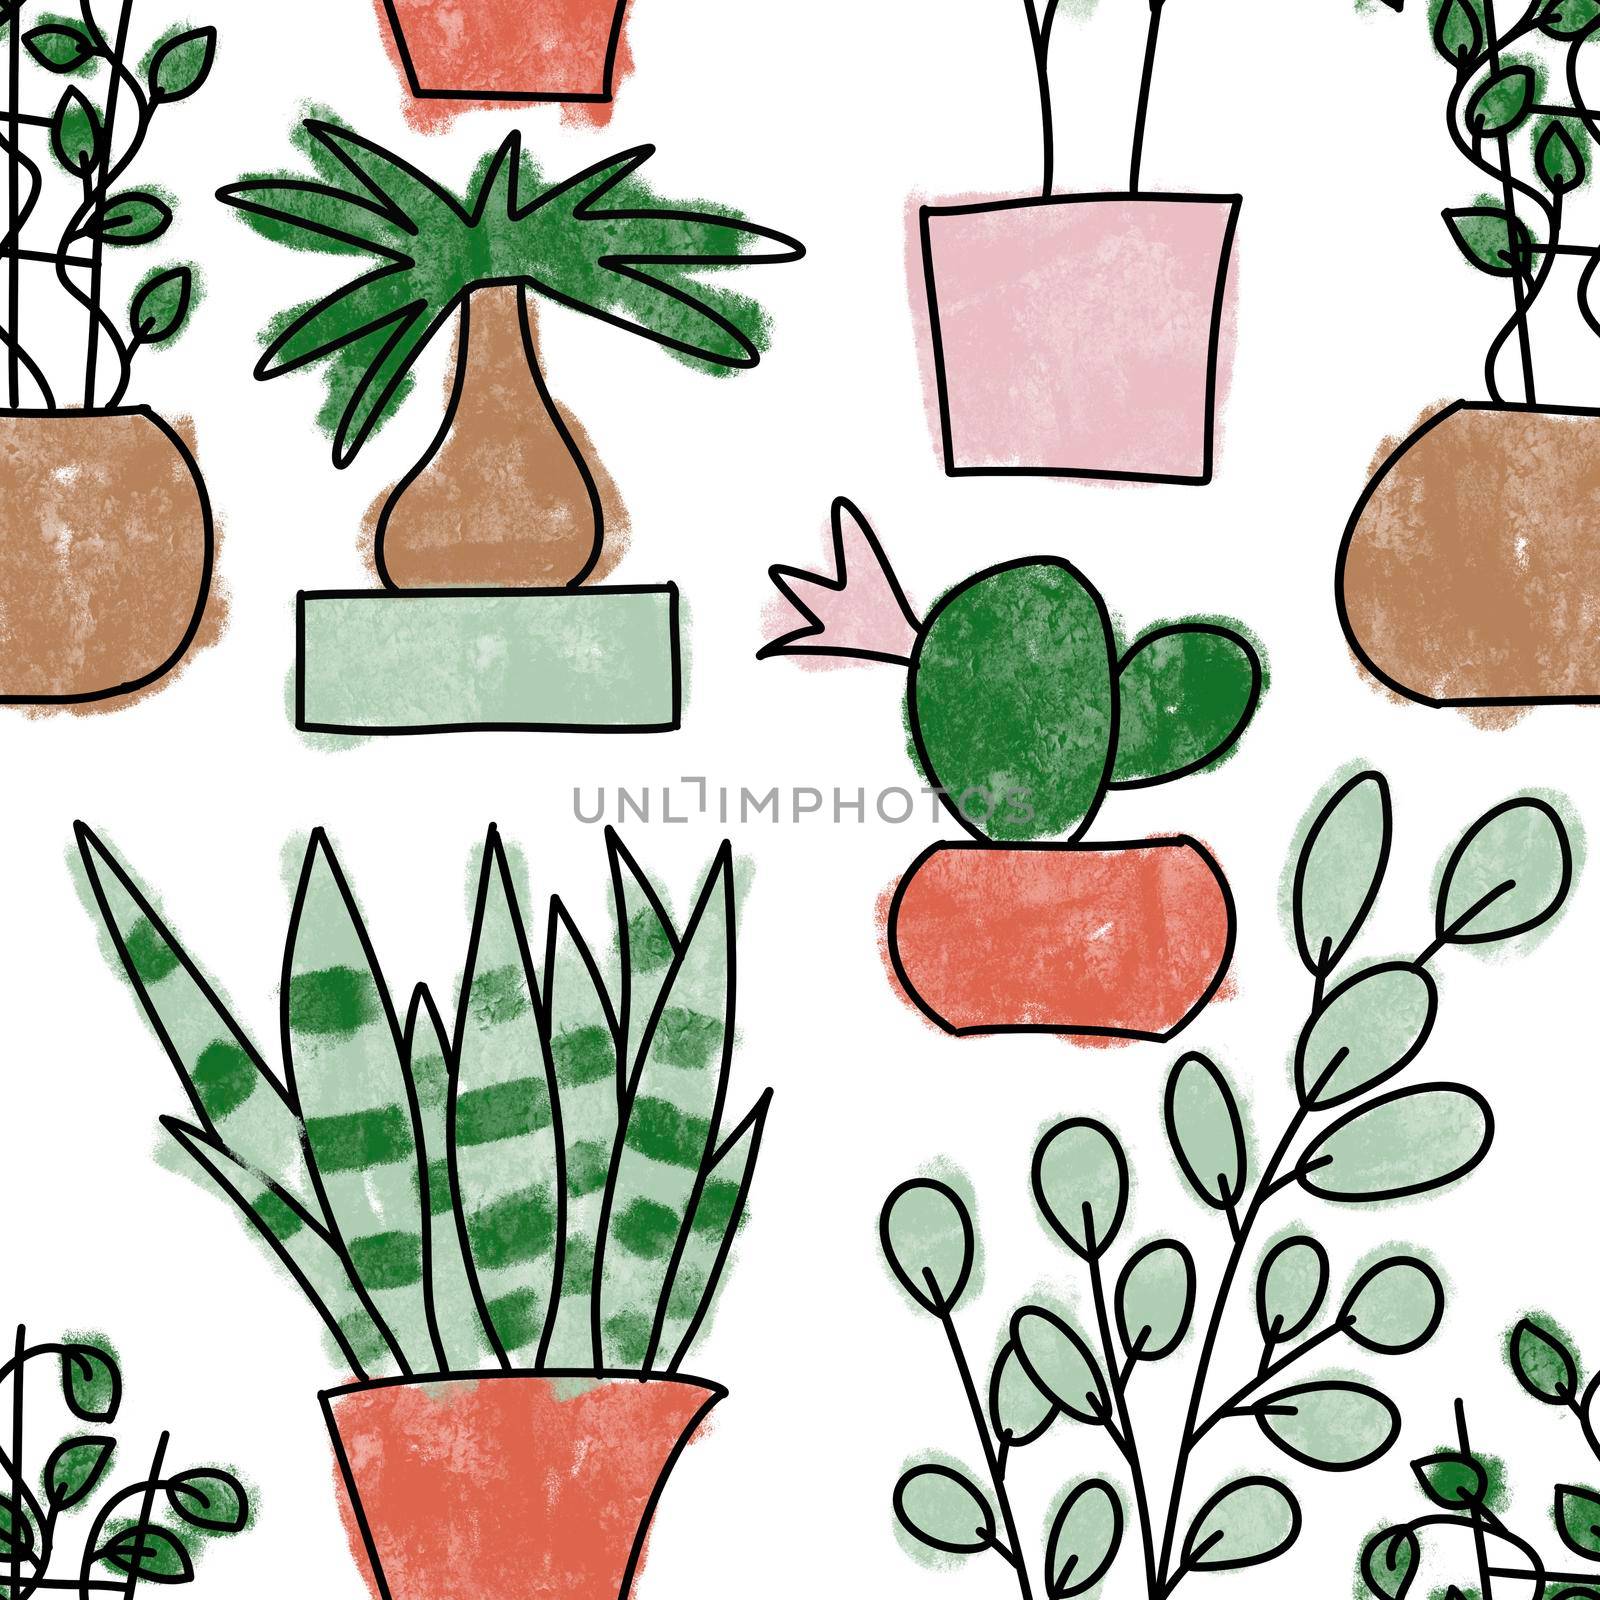 Seamless hand drawn pattern with houseplants, indoor plants flowers in pots, green leaves potted herbs. Urban jungle concept zz plant monstera snake plant peace lily cactus cacti succulent. by Lagmar